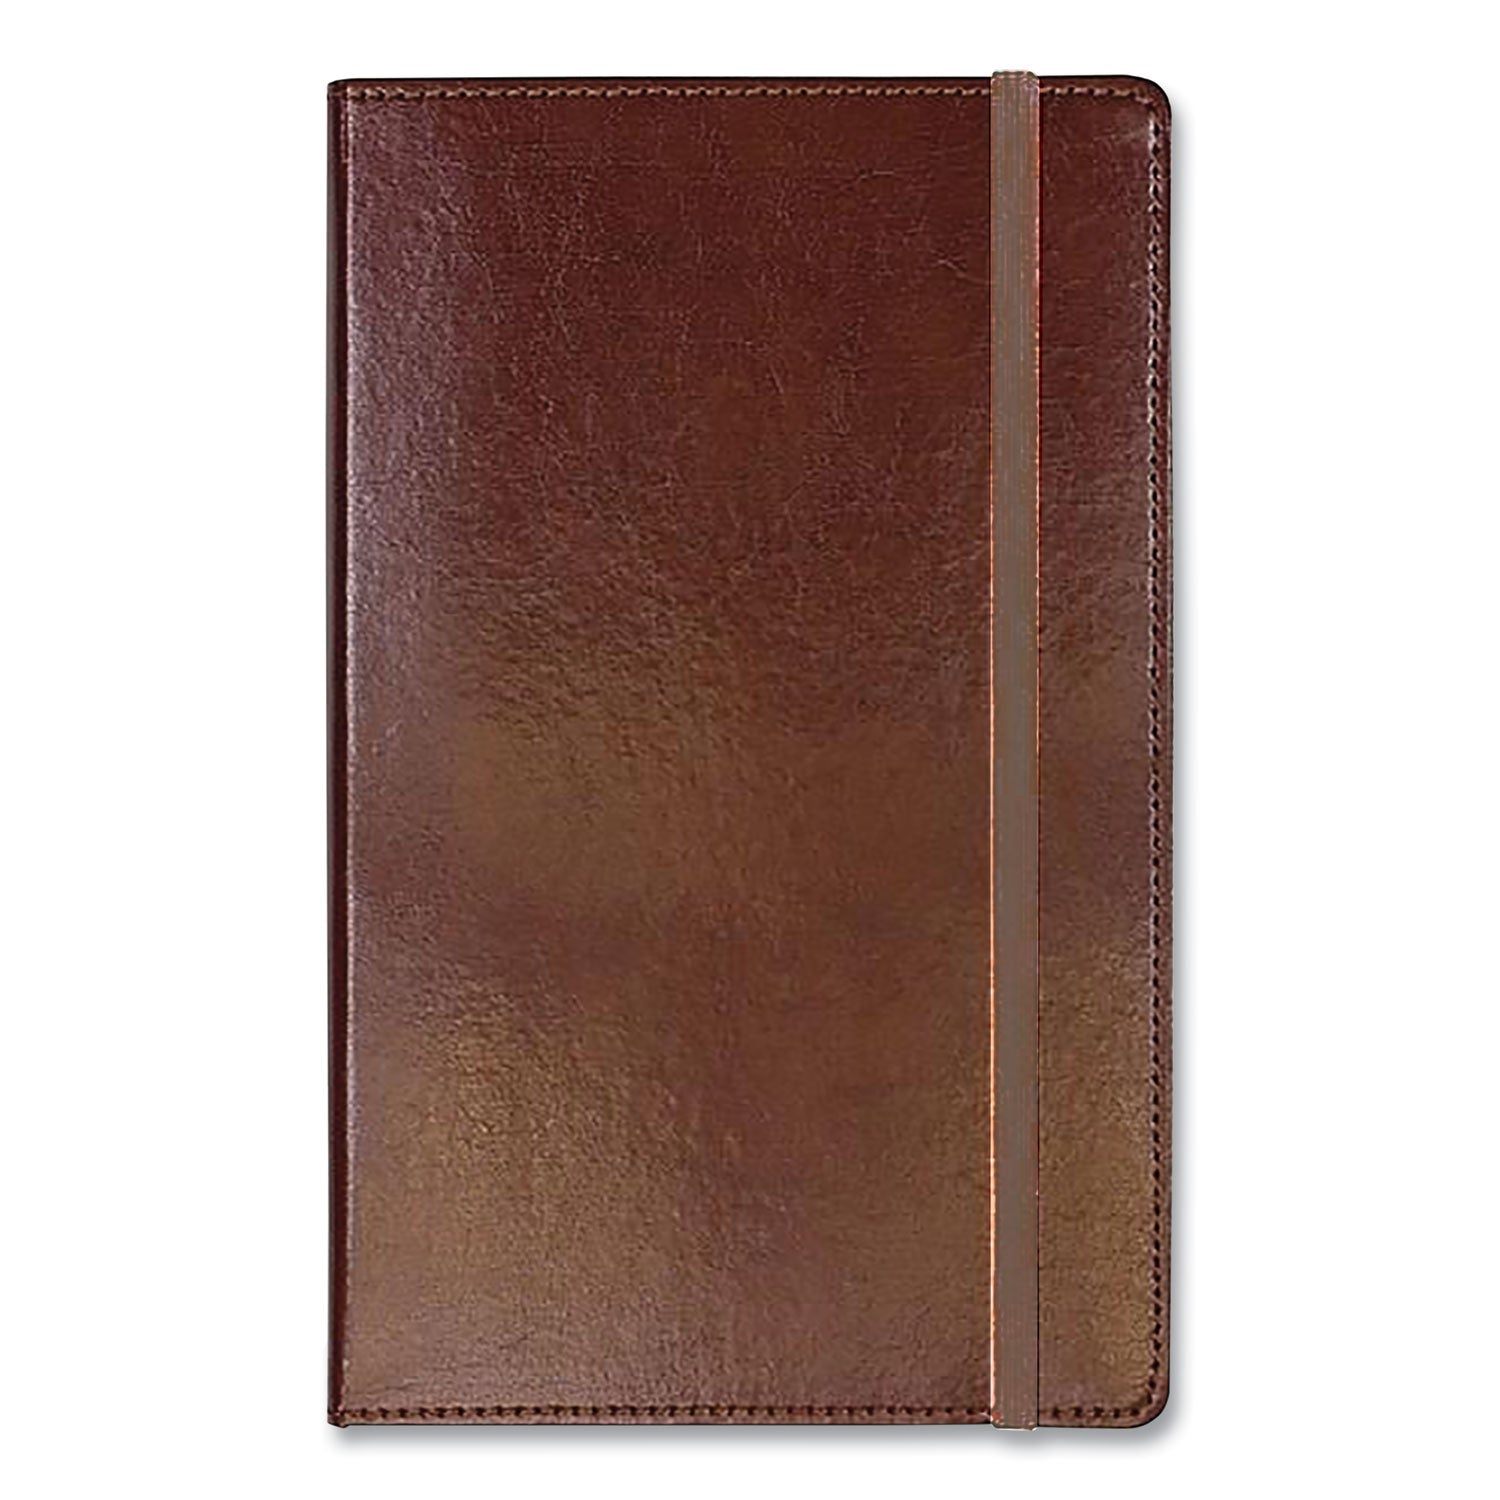 bonded-leather-journal-1-subject-narrow-rule-brown-cover-240-825-x-5-sheets_cgbmj54792 - 1